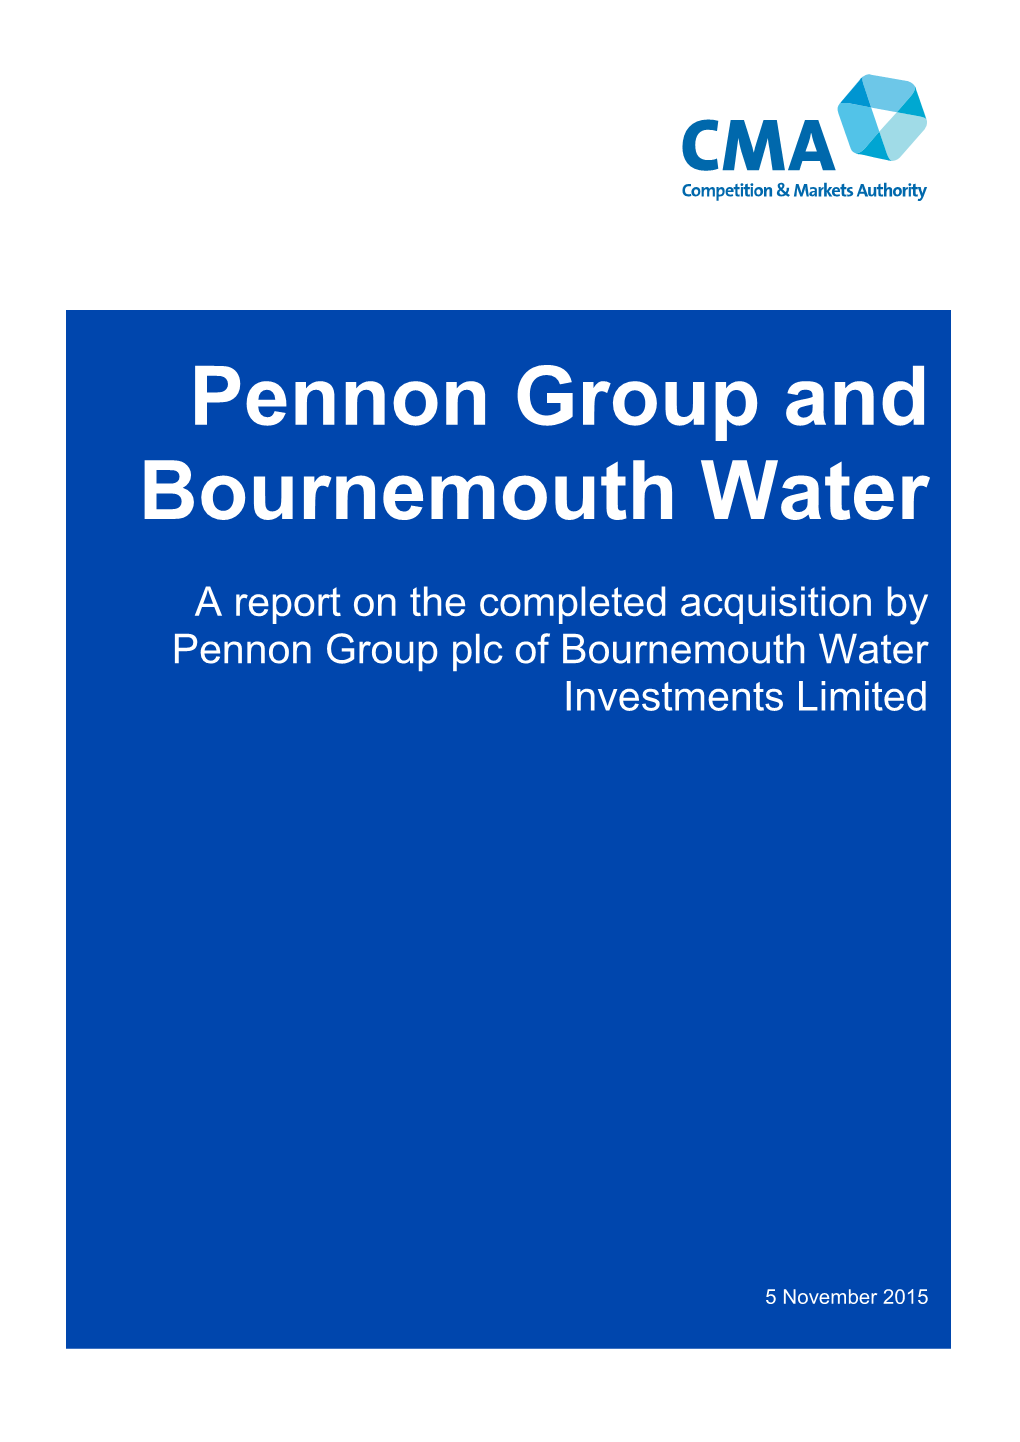 Pennon Group and Bournemouth Water Final Report